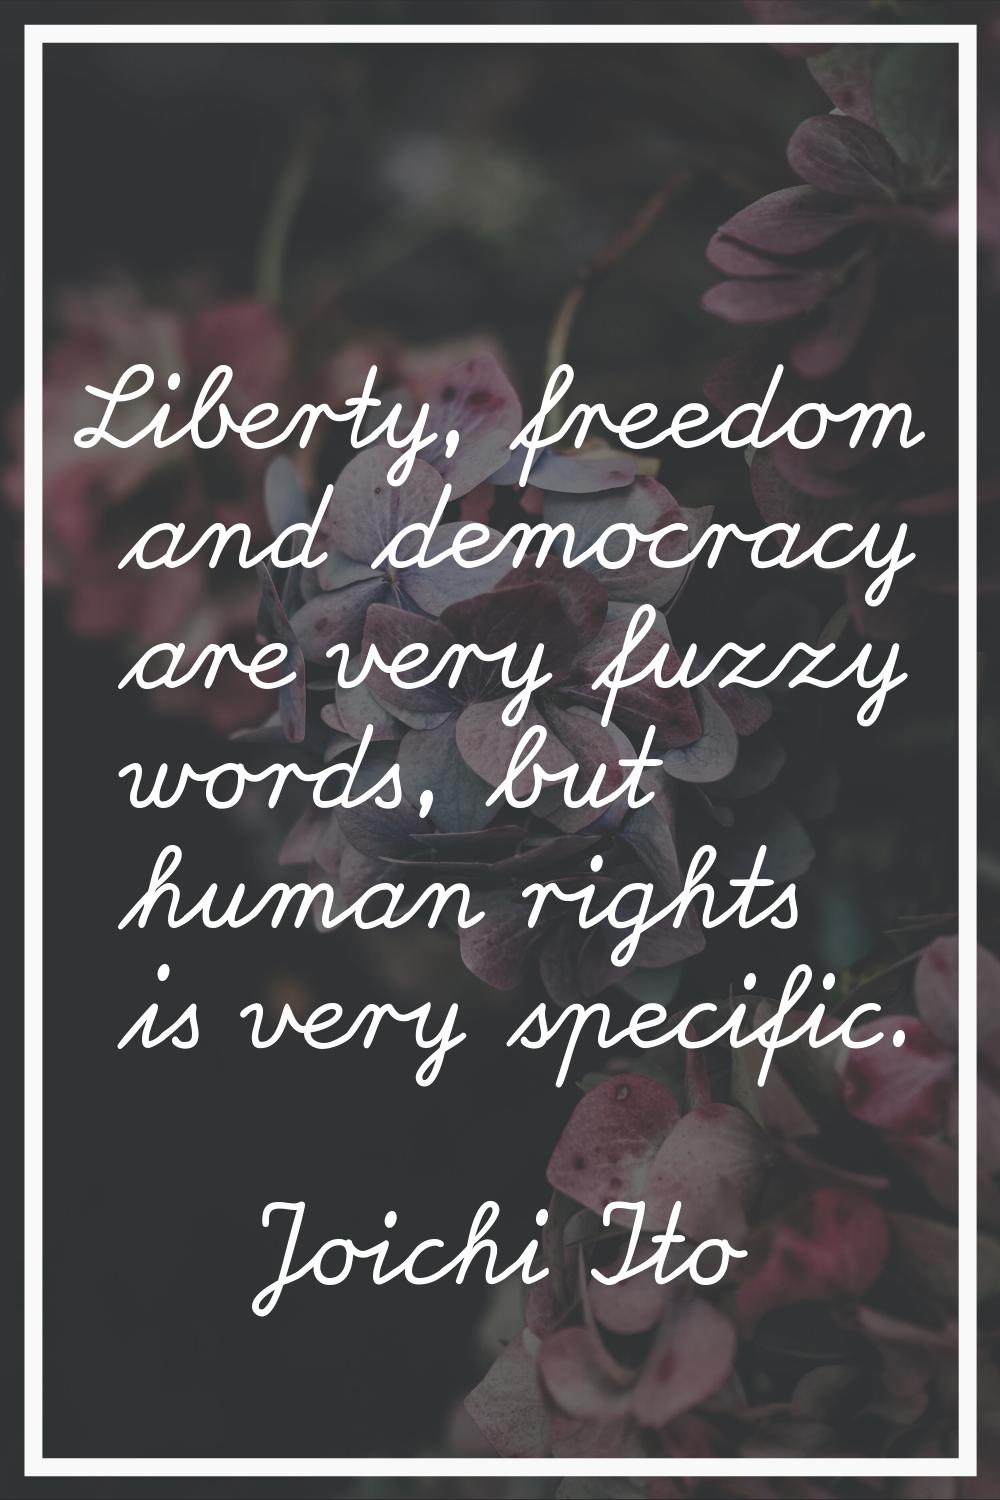 Liberty, freedom and democracy are very fuzzy words, but human rights is very specific.